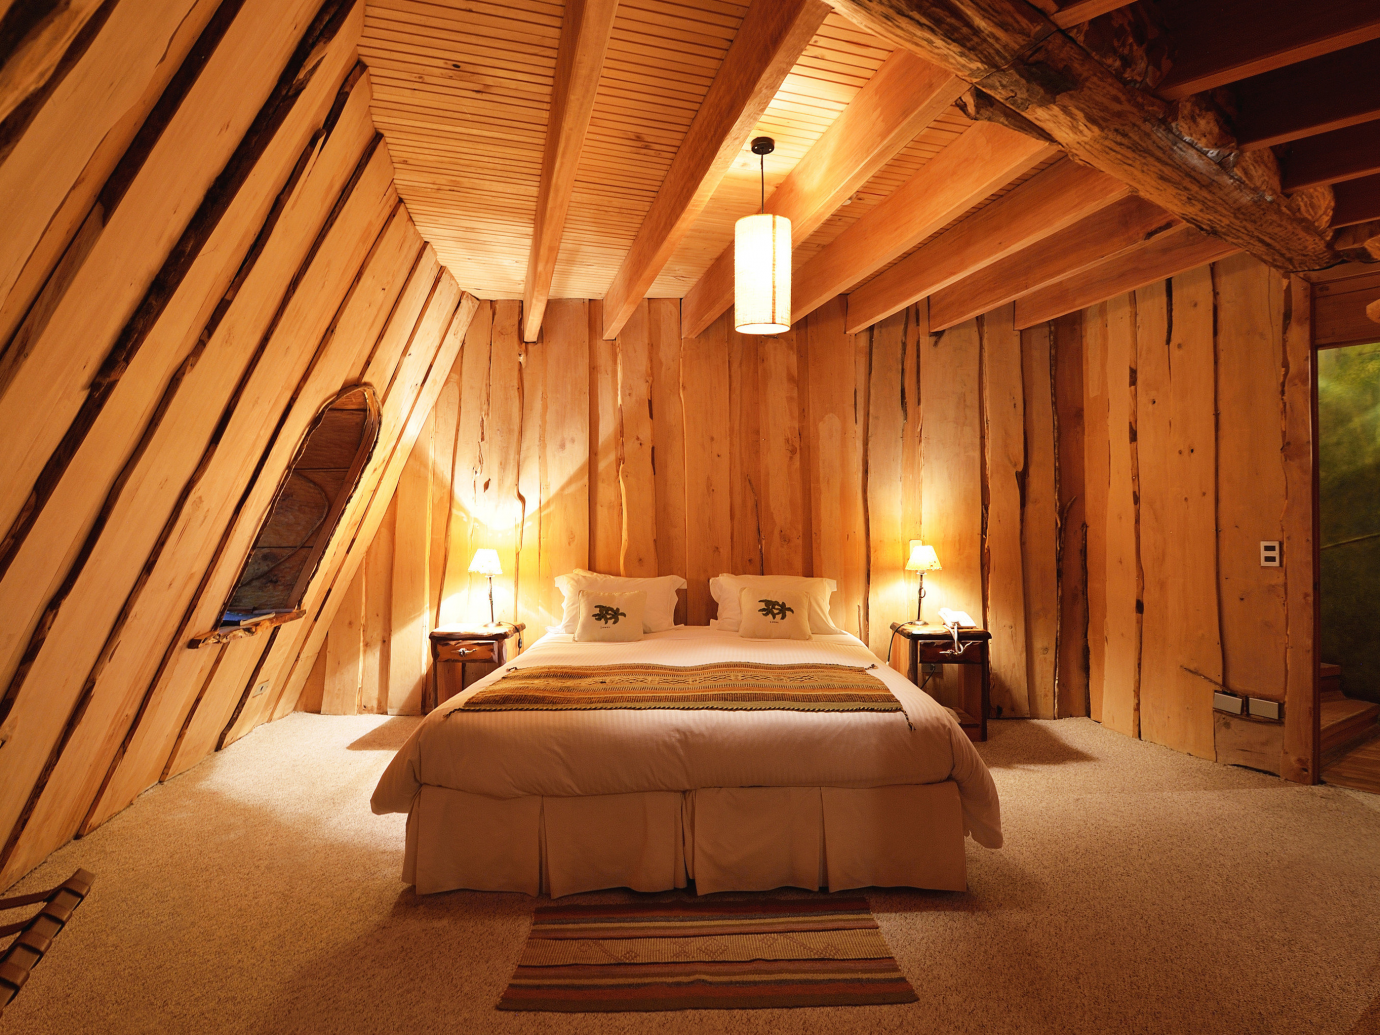 Wooden and warm room interior with queen sized bed